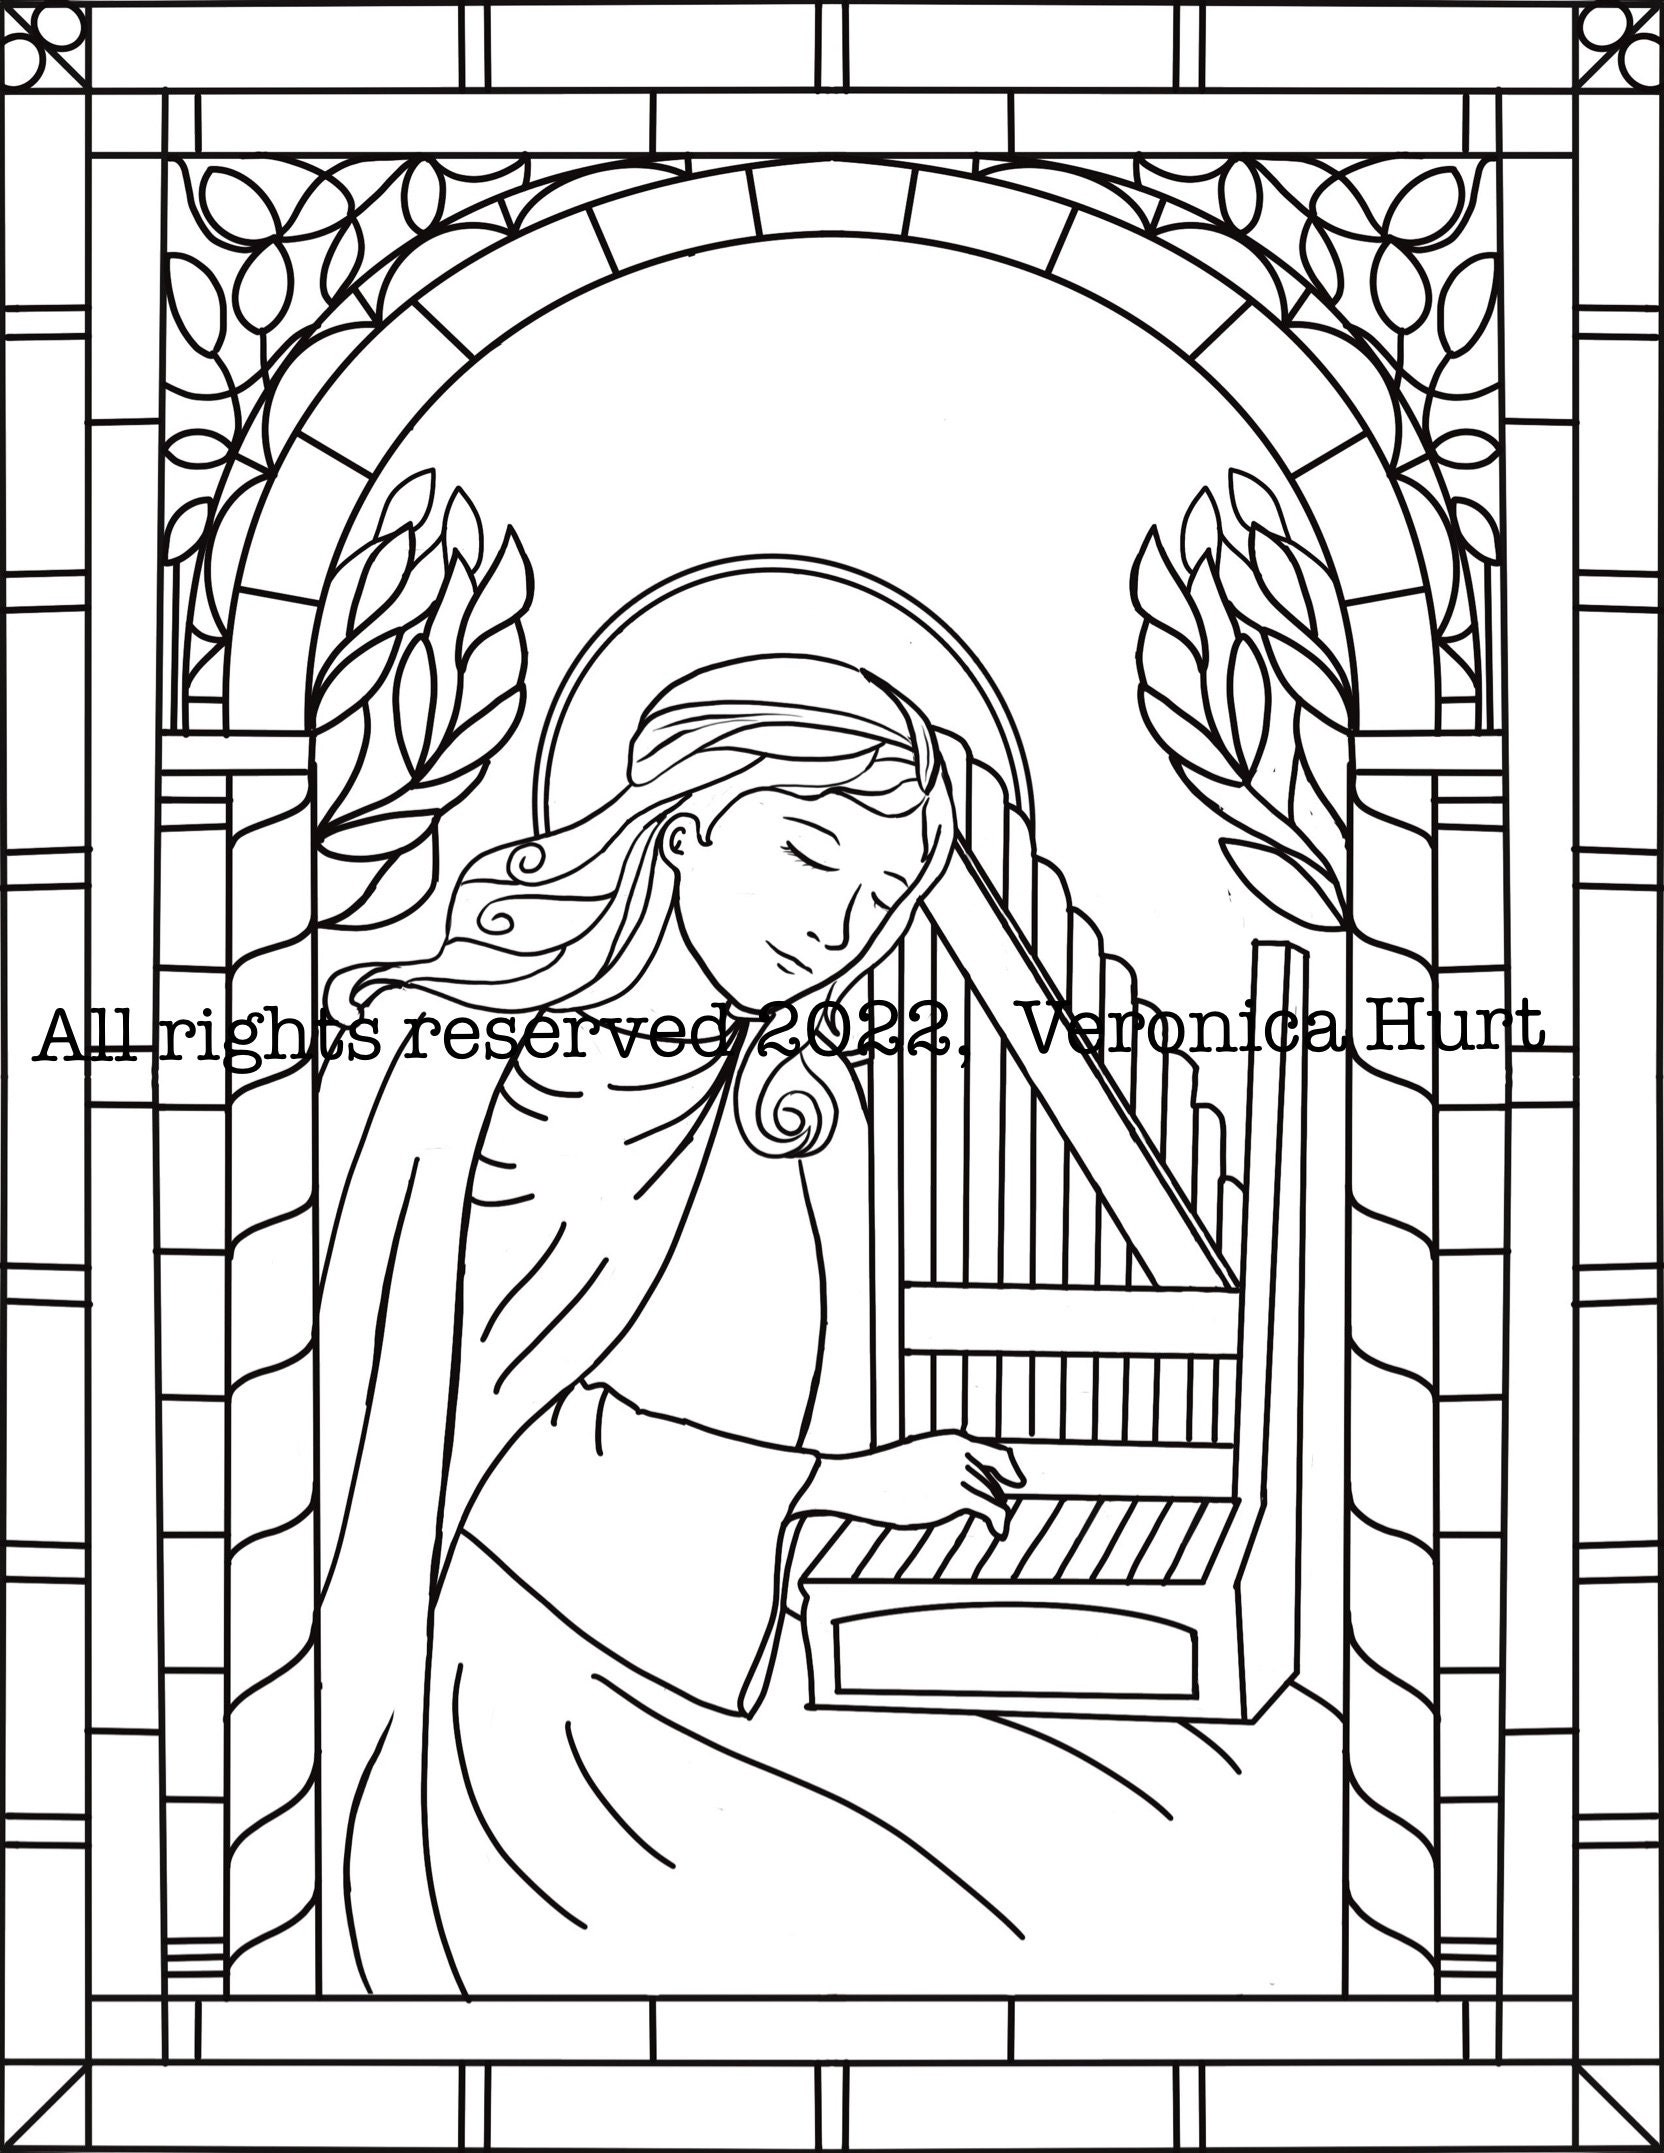 Saint cecilia november feast day stained glass coloring page for kids and adults